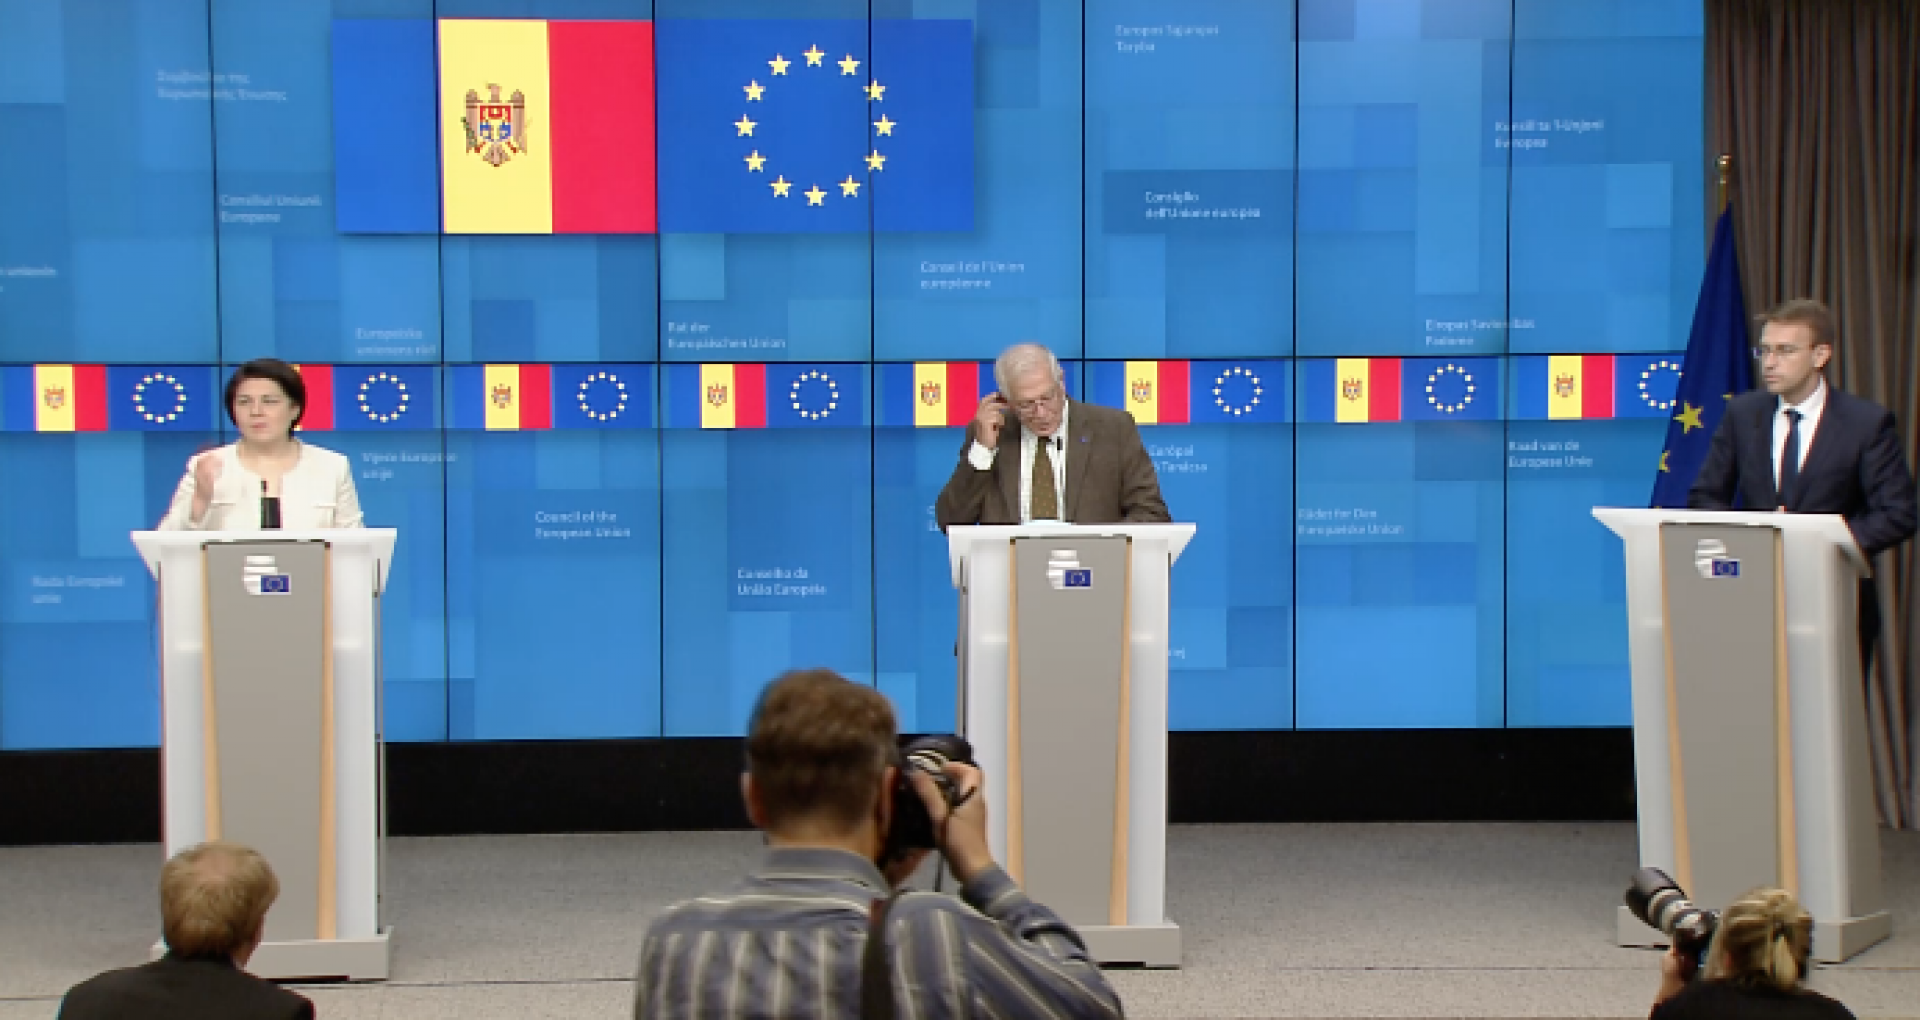 Press Statements by Prime Minister Natalia Gavrilița and EU High Representative for Foreign Affairs Josep Borrell: “EU is ready to support Moldova to emerge from the crisis”